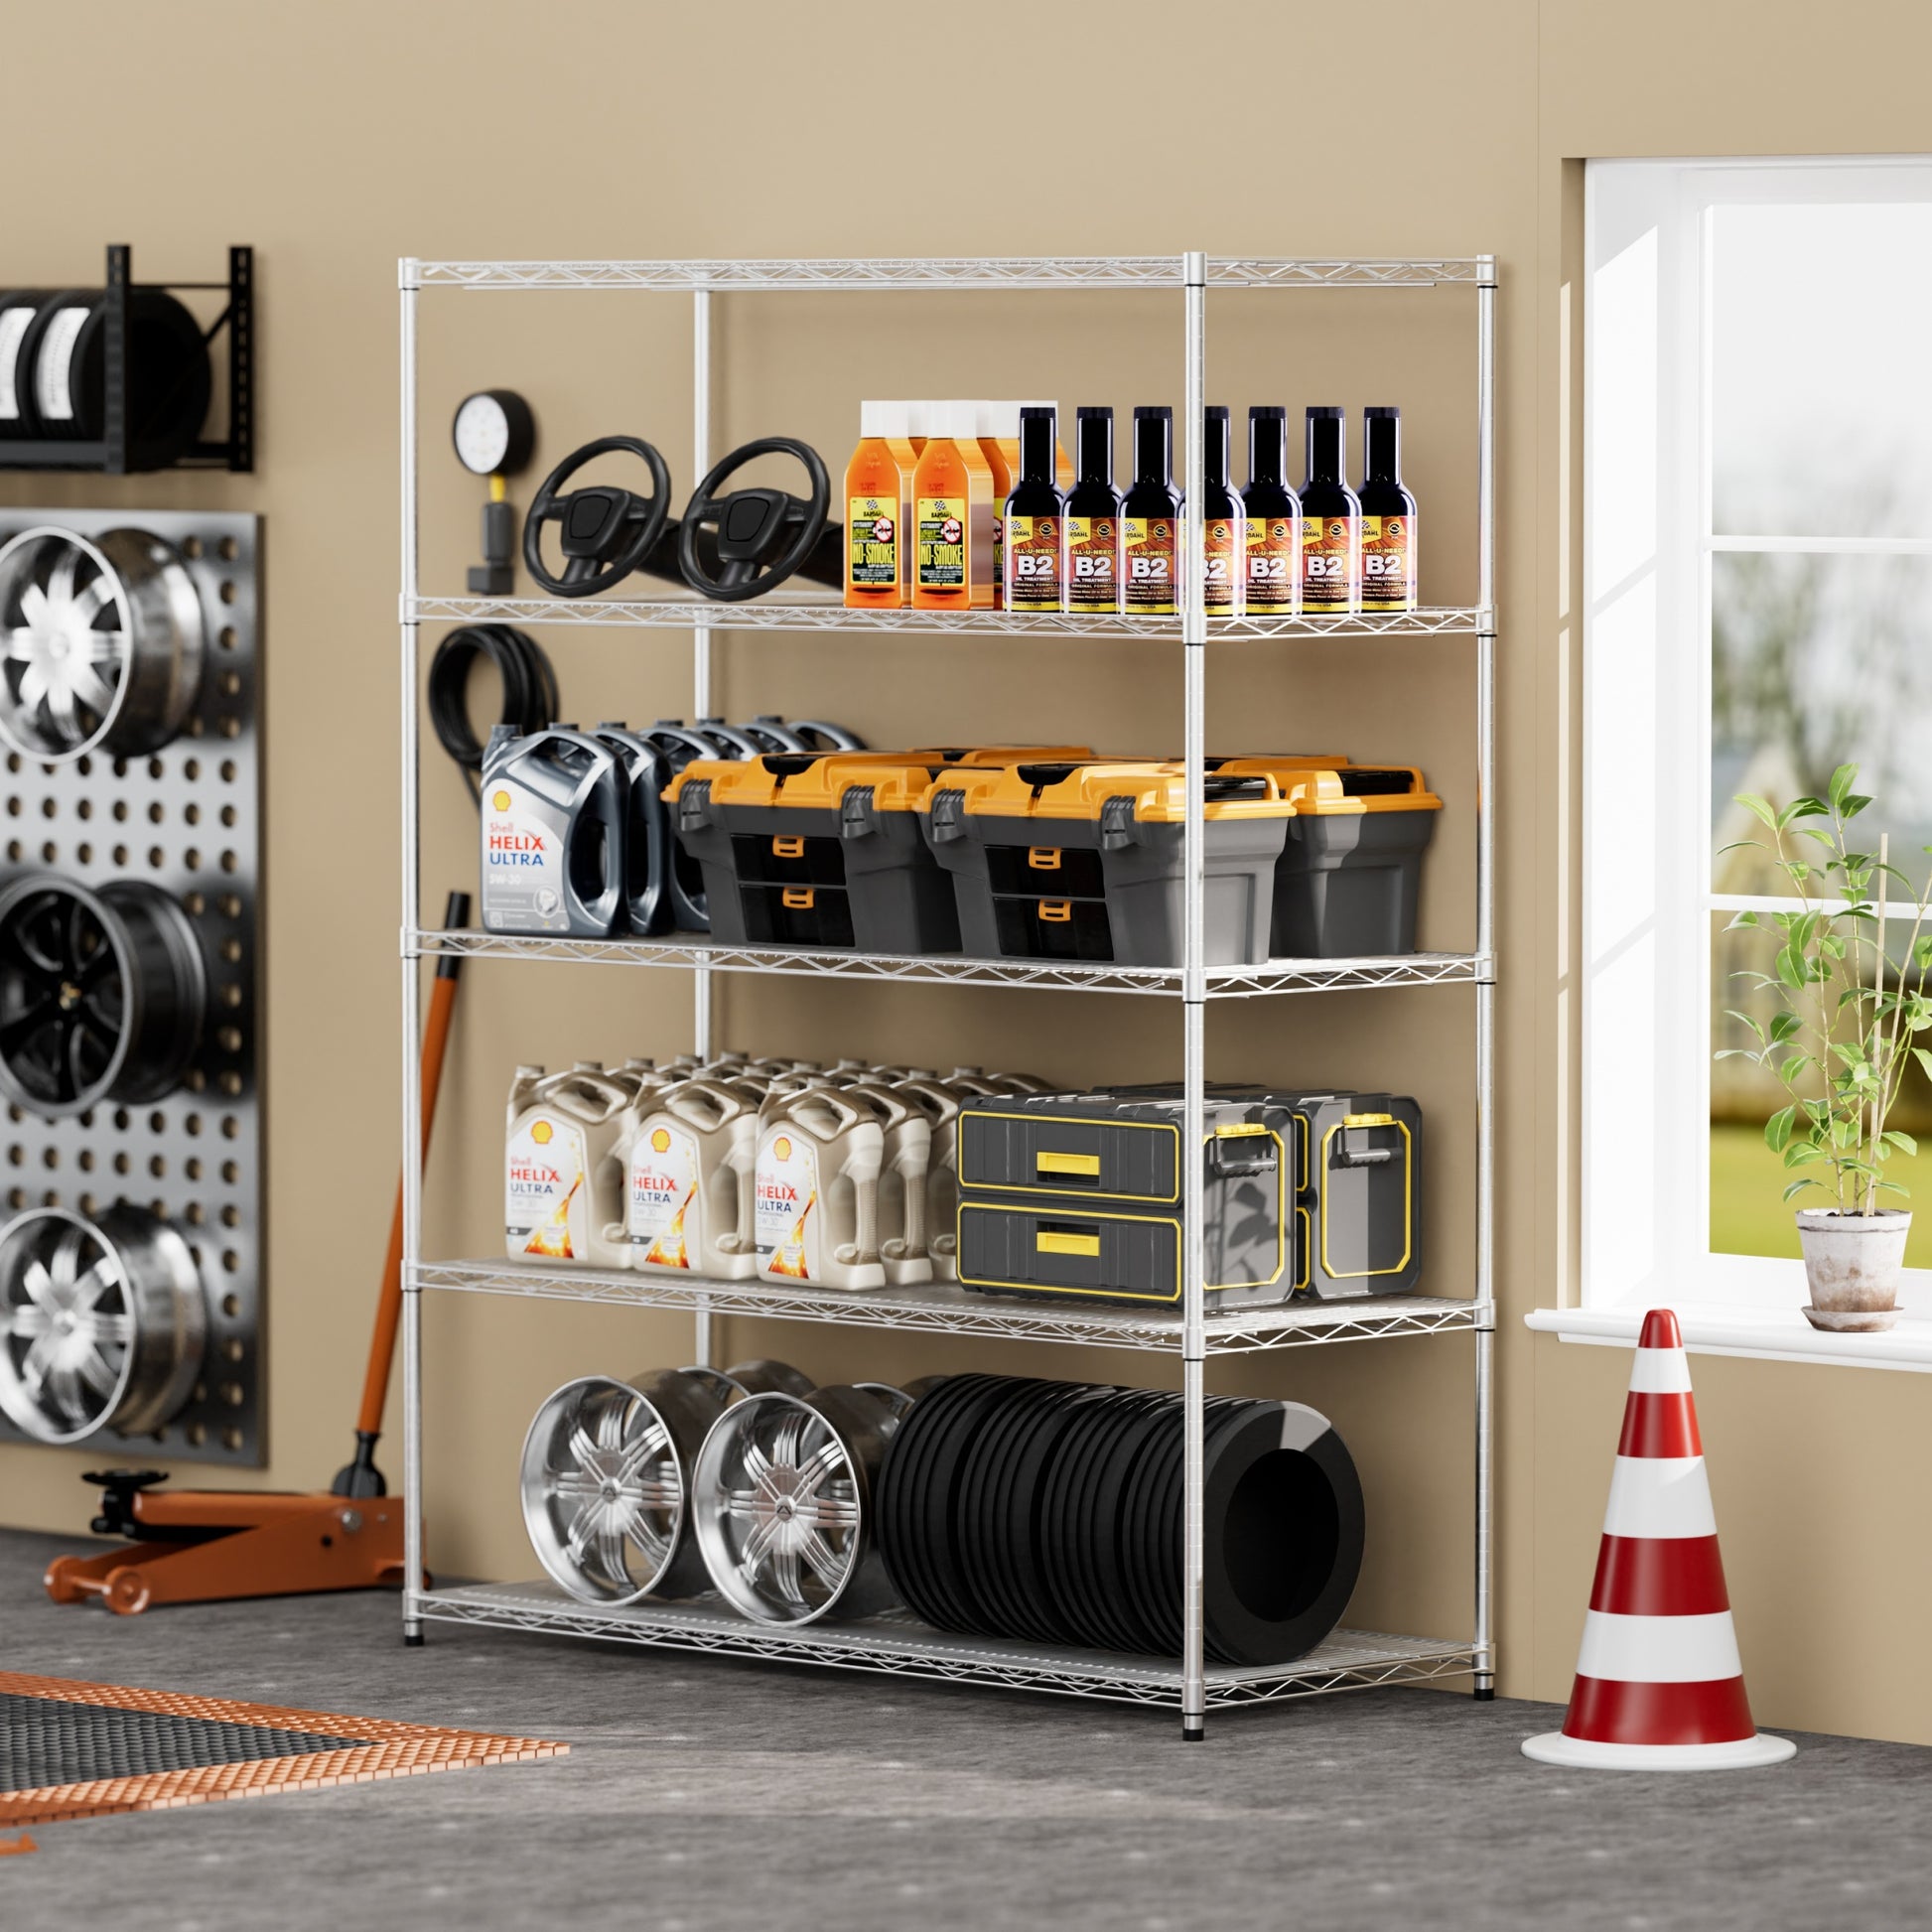 5 Tier Heavy Duty Adjustable Shelving And